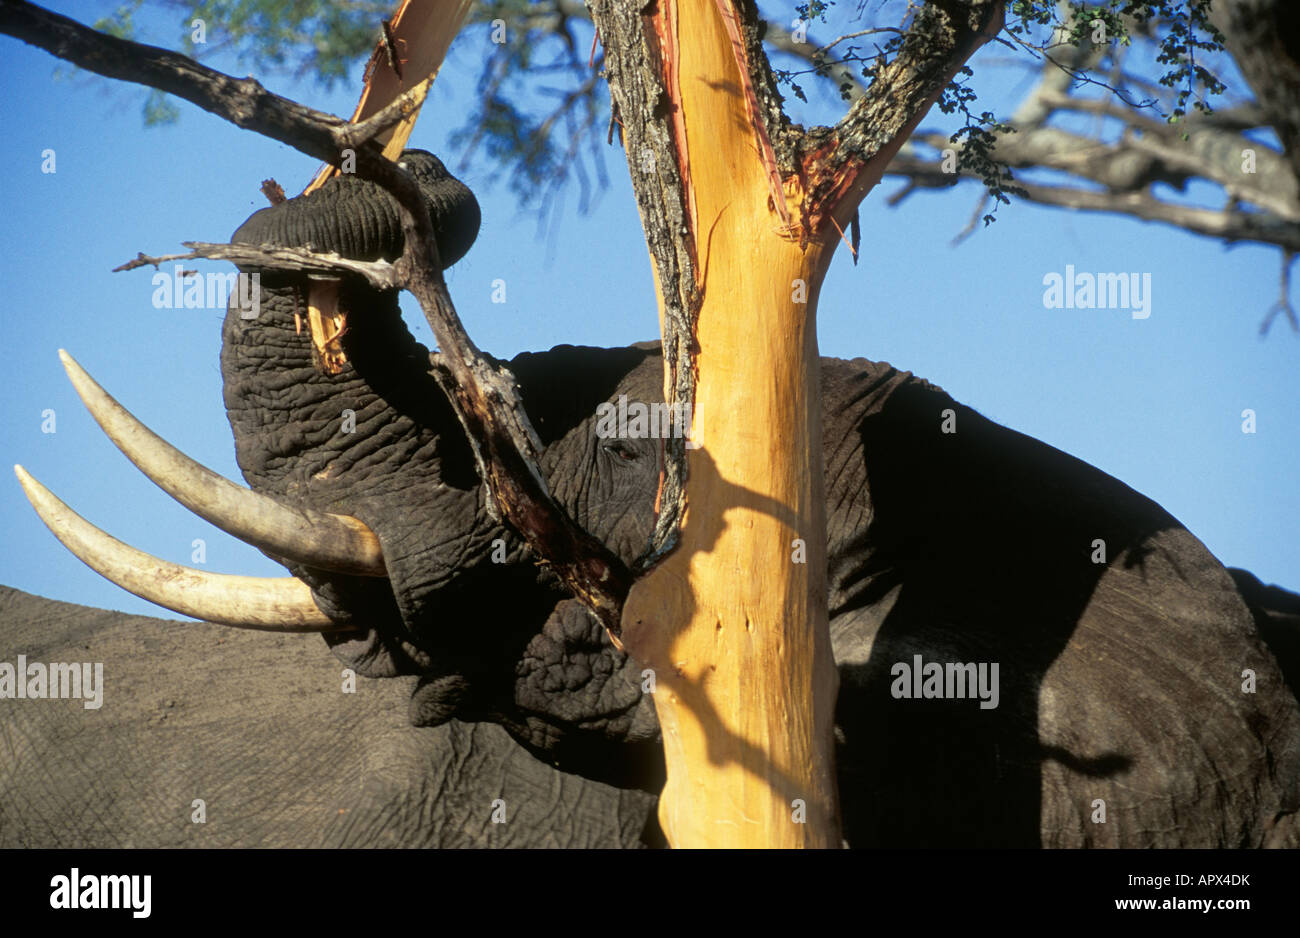 Detail of an elephant stripping a piece of bark off an Acacia nigrescens tree Stock Photo